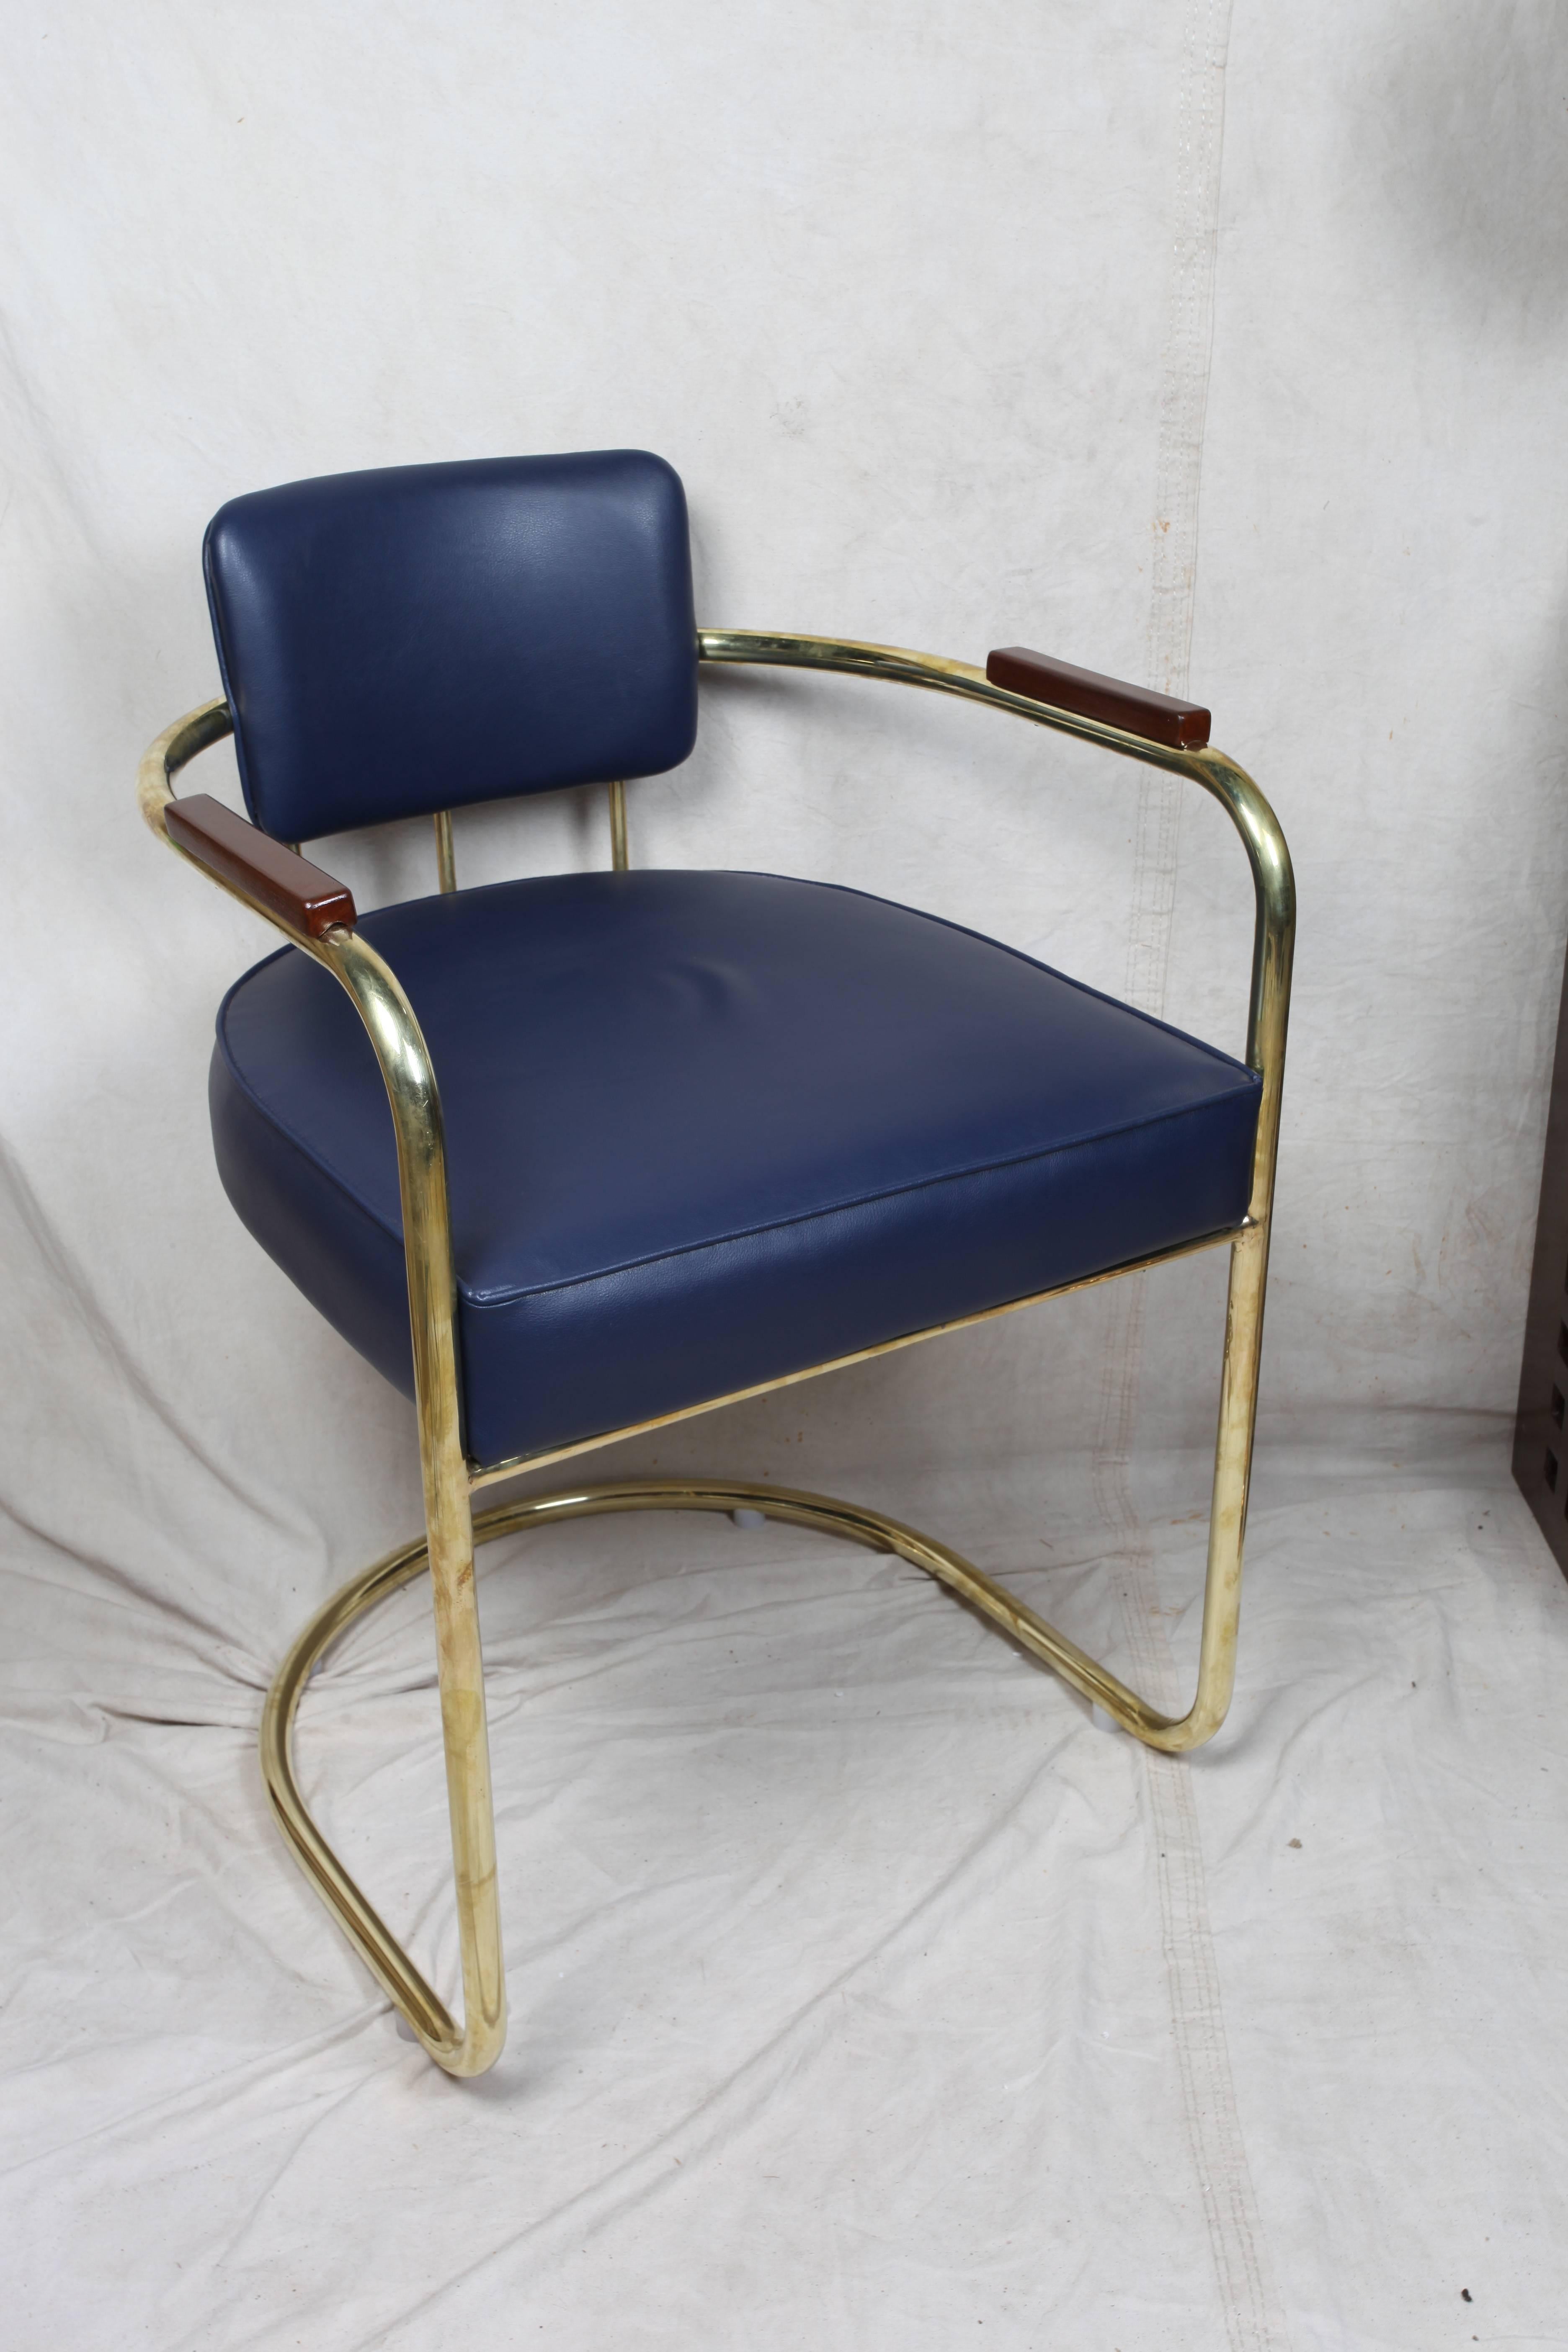 20th Century Pair of Brass Captains Chairs with Navy Blue Cushions, Late 1900s